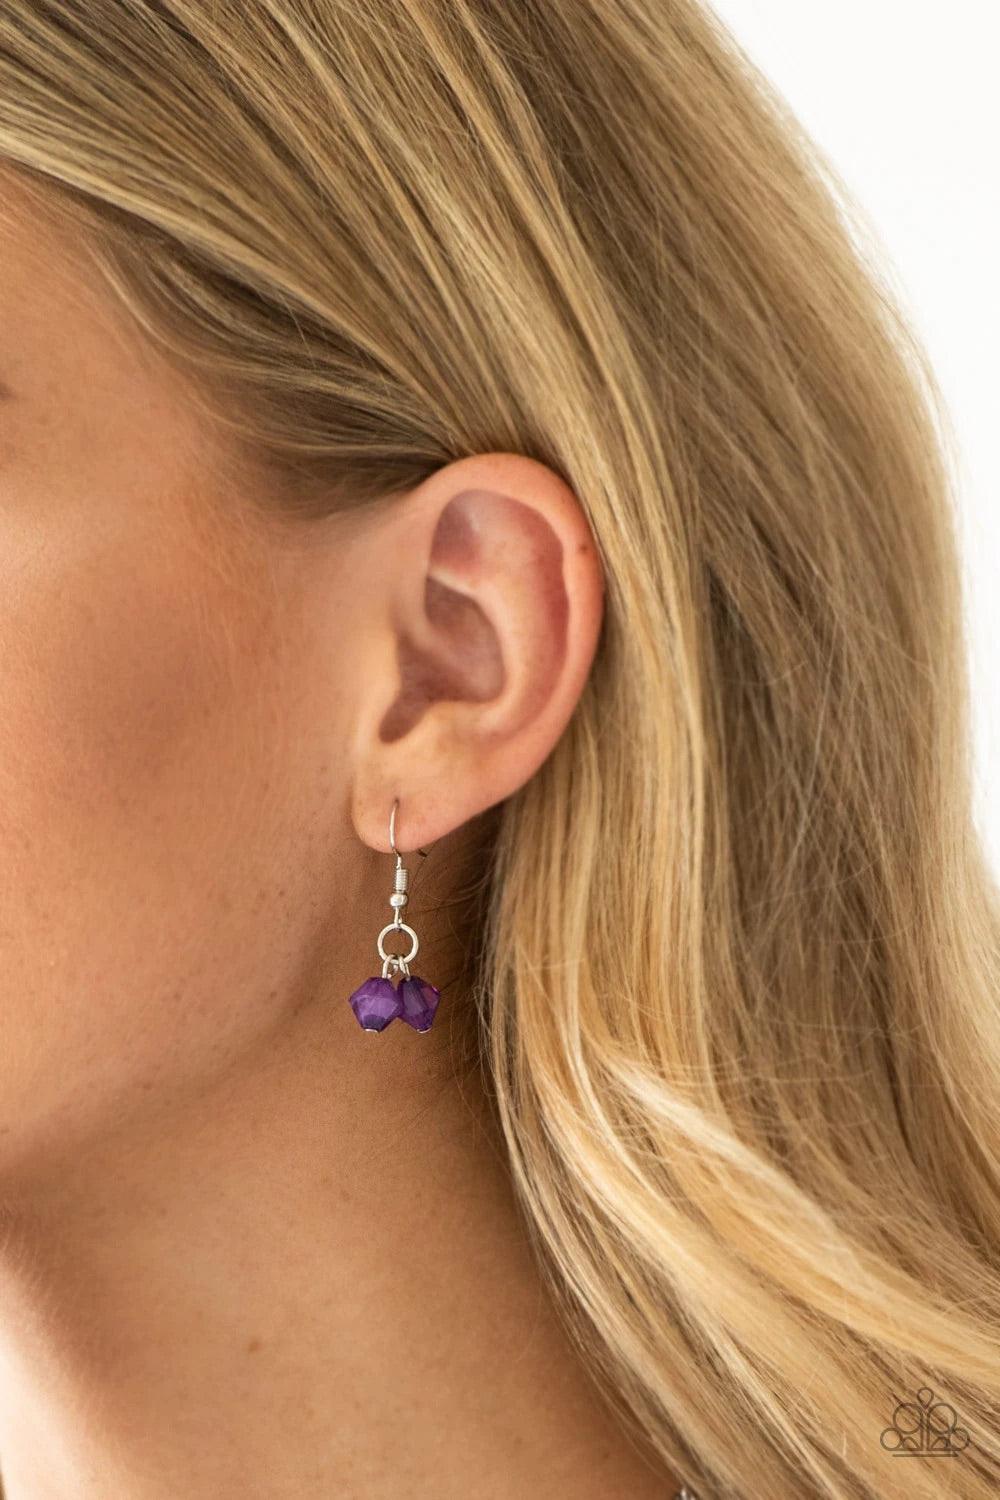 Paparazzi Accessories Grand Canyon - Purple Featuring polished and cloudy finishes, a collection of purple faux rocks dance from the bottom of a bold silver chain. Classic silver beads trickle between the colorful beading, adding a metallic shimmer to the